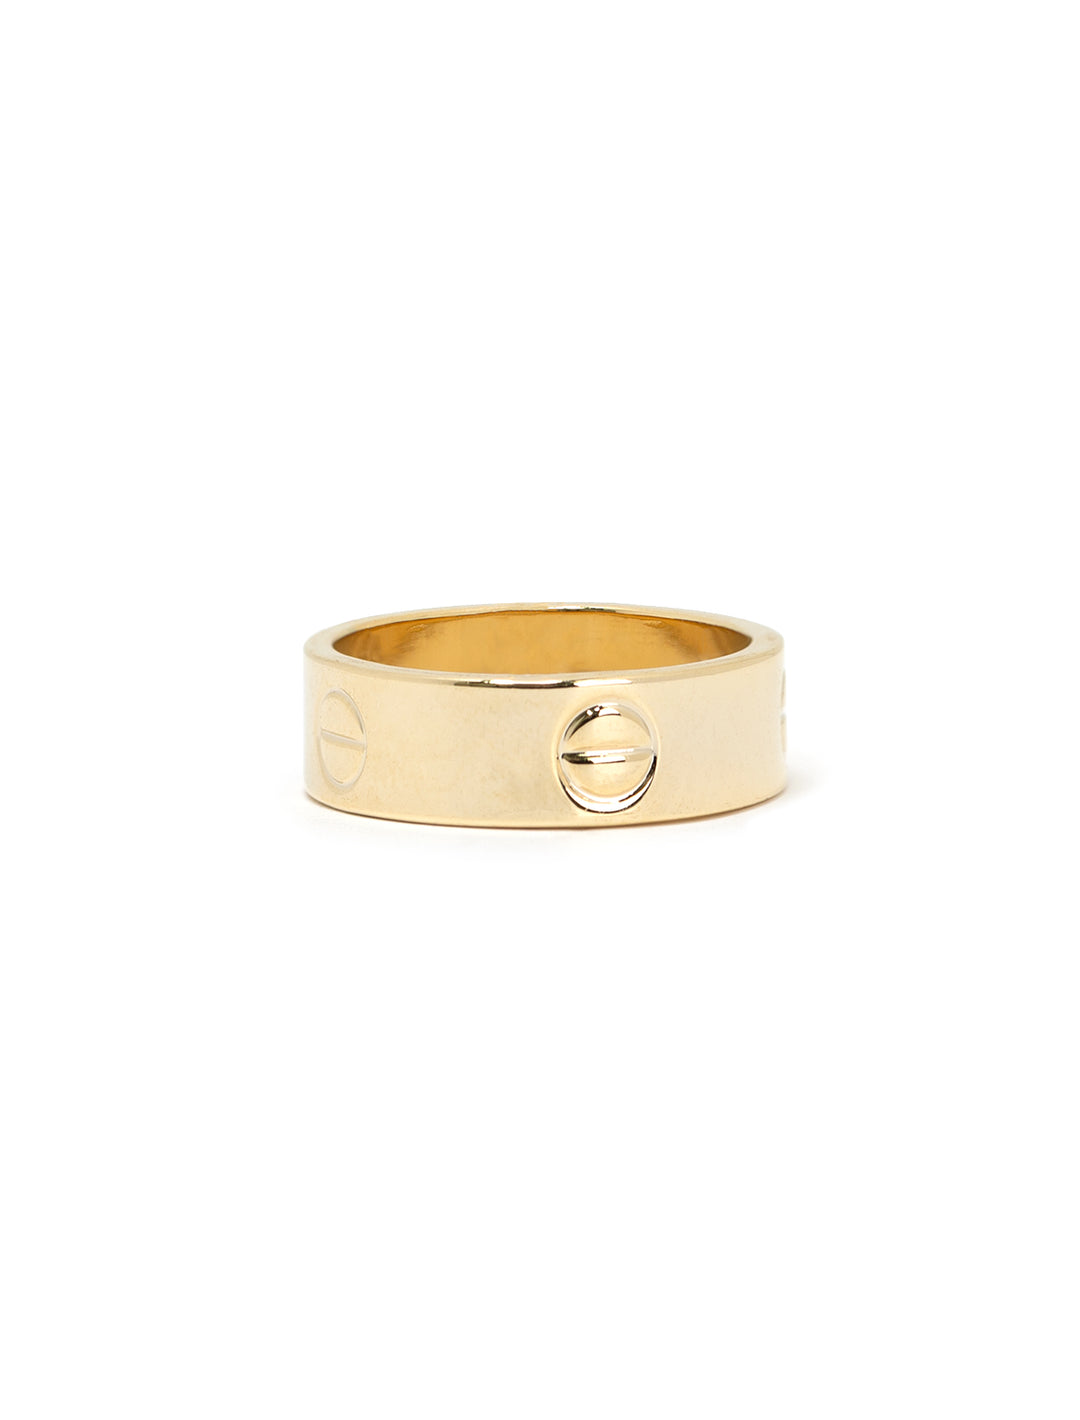 Front view of AV Max gold screw accent ring